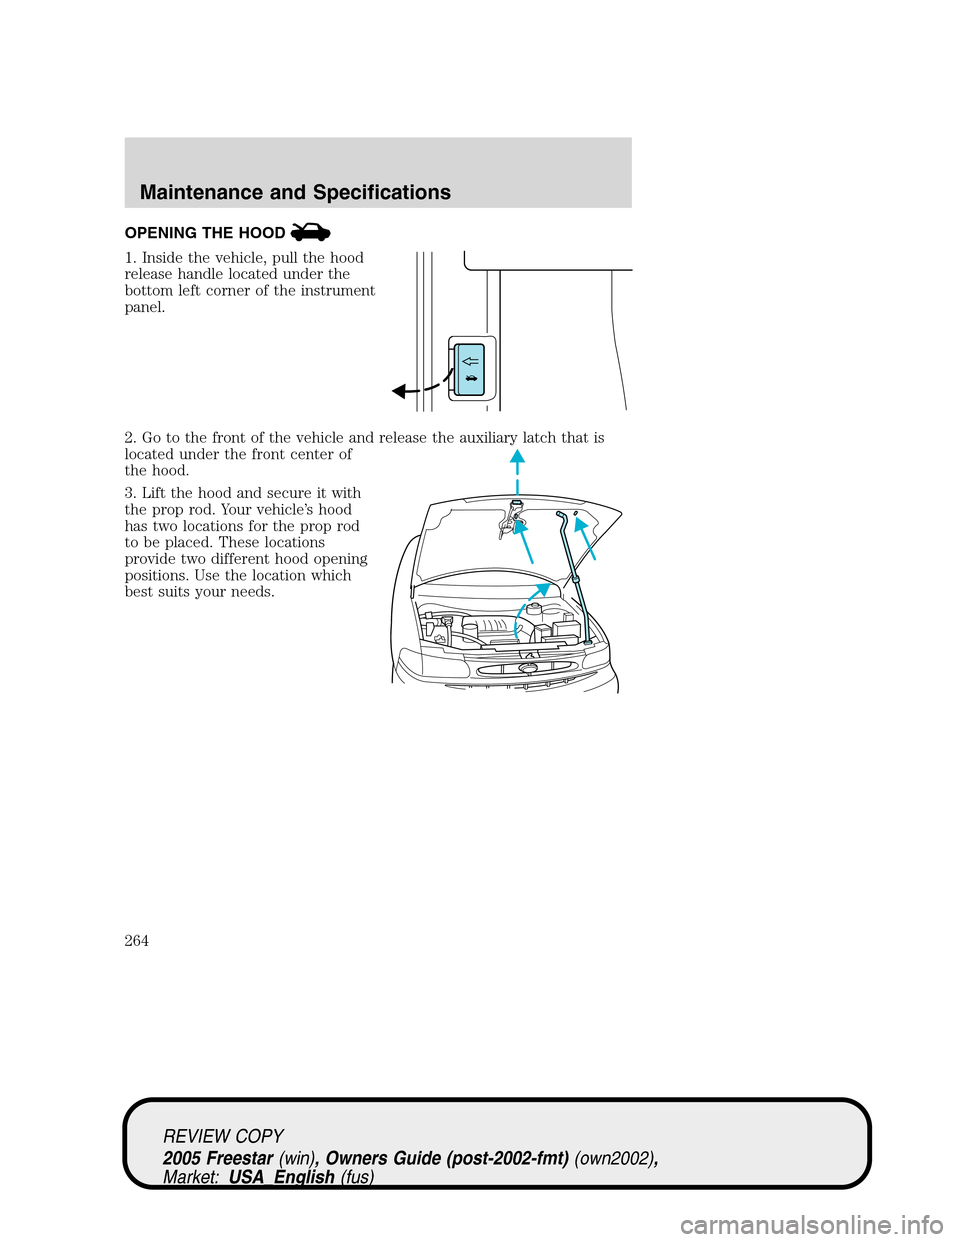 FORD FREESTAR 2005 1.G Owners Manual OPENING THE HOOD
1. Inside the vehicle, pull the hood
release handle located under the
bottom left corner of the instrument
panel.
2. Go to the front of the vehicle and release the auxiliary latch tha